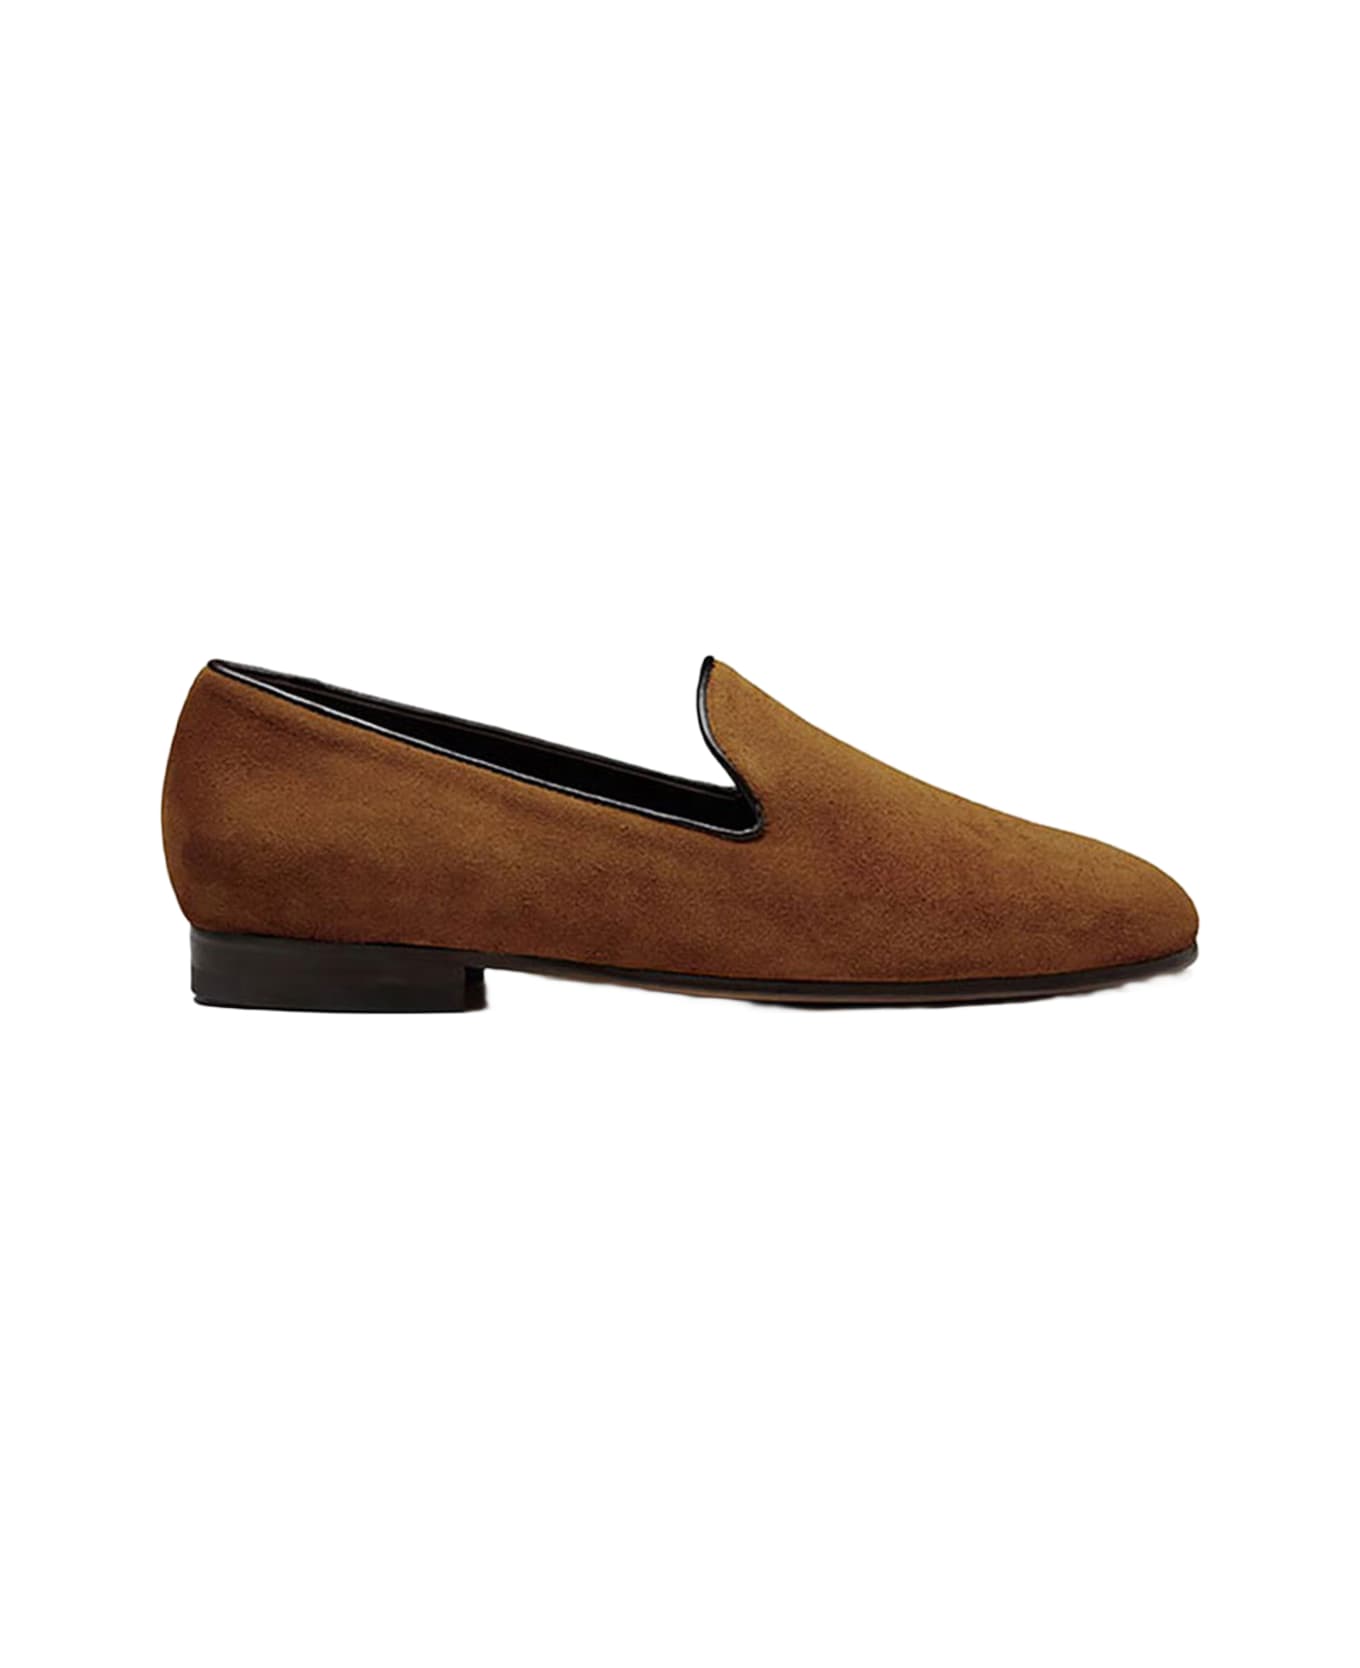 CB Made in Italy Suede Slip-on Positano - Tobacco ローファー＆デッキシューズ